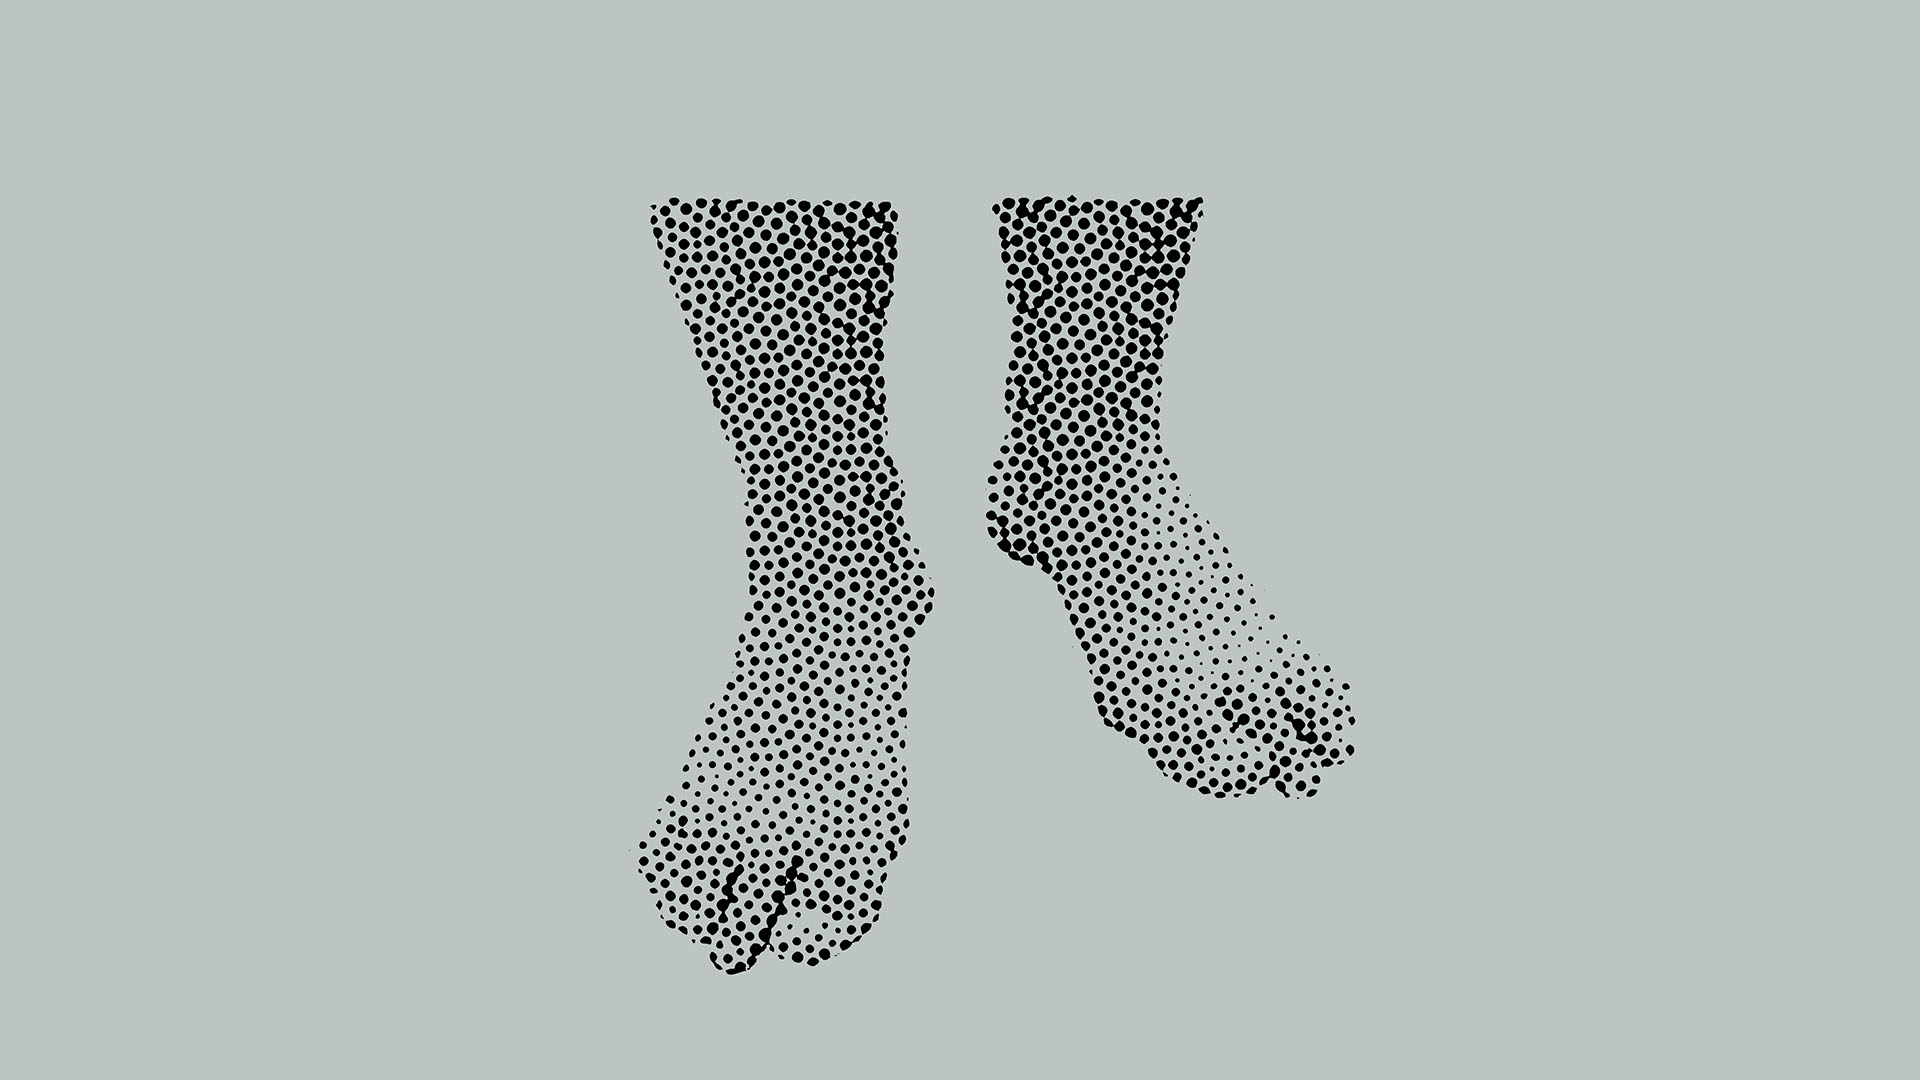 Image of a pair of feet icon